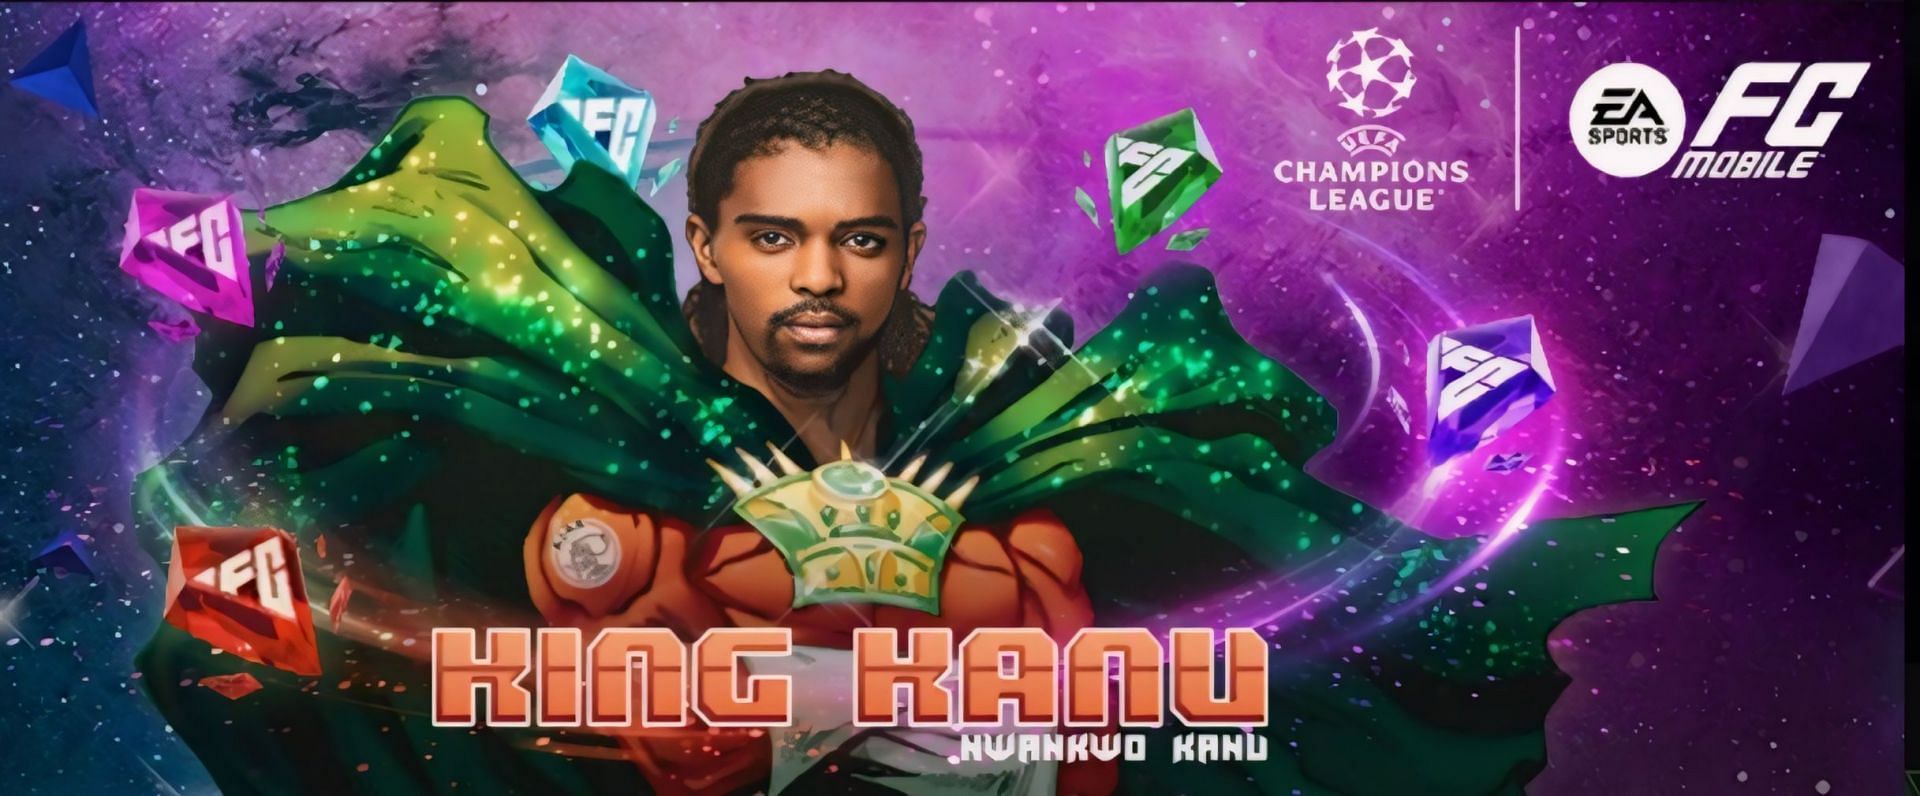 FC Mobile Heroes King Kanu chapter is now live in the servers (Image via EA Sports)